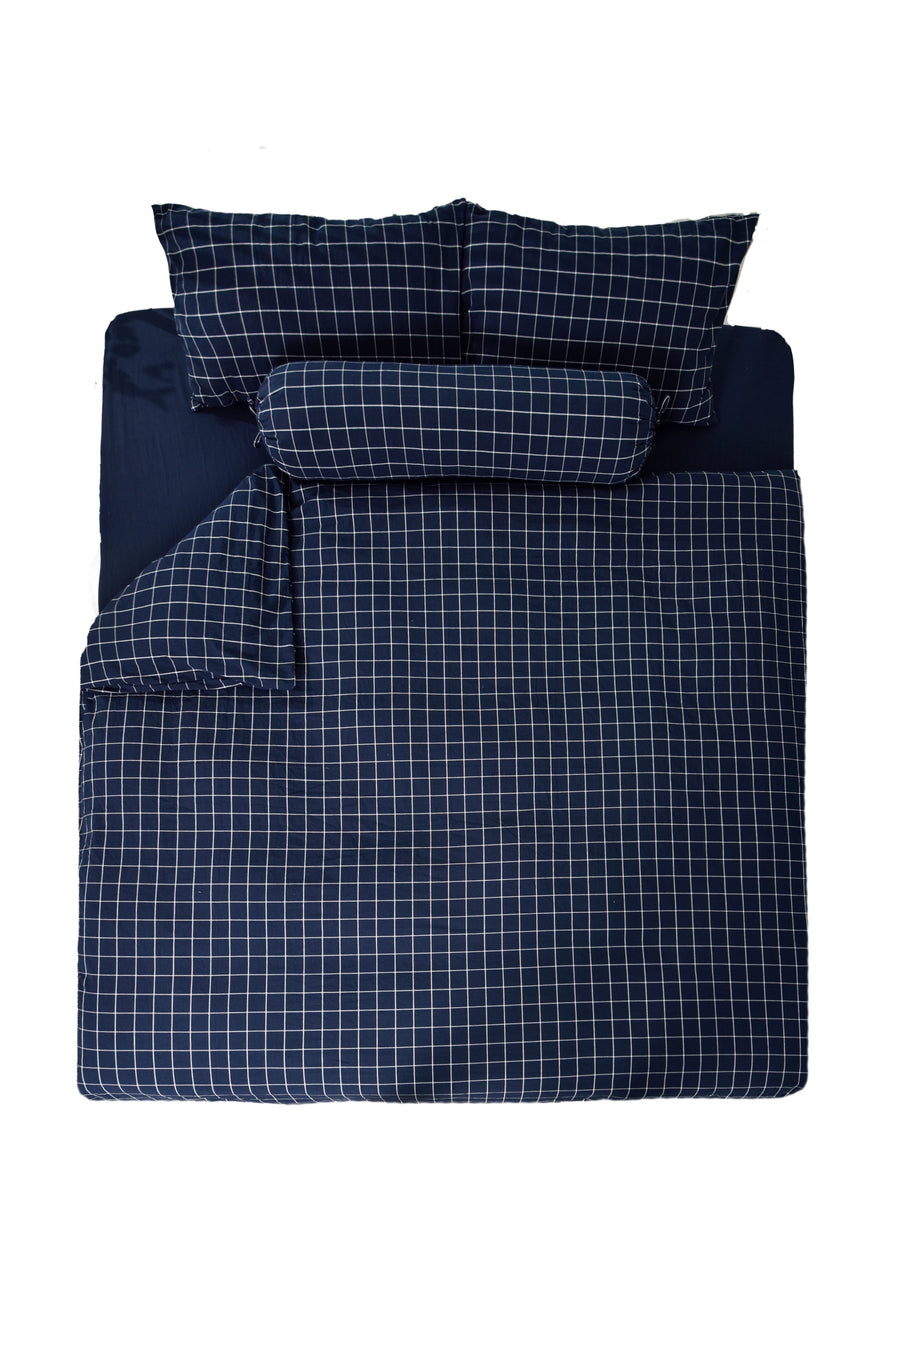 Ohel Gingham SS 3-pc Fitted Sheet Set (Midnight Blue)